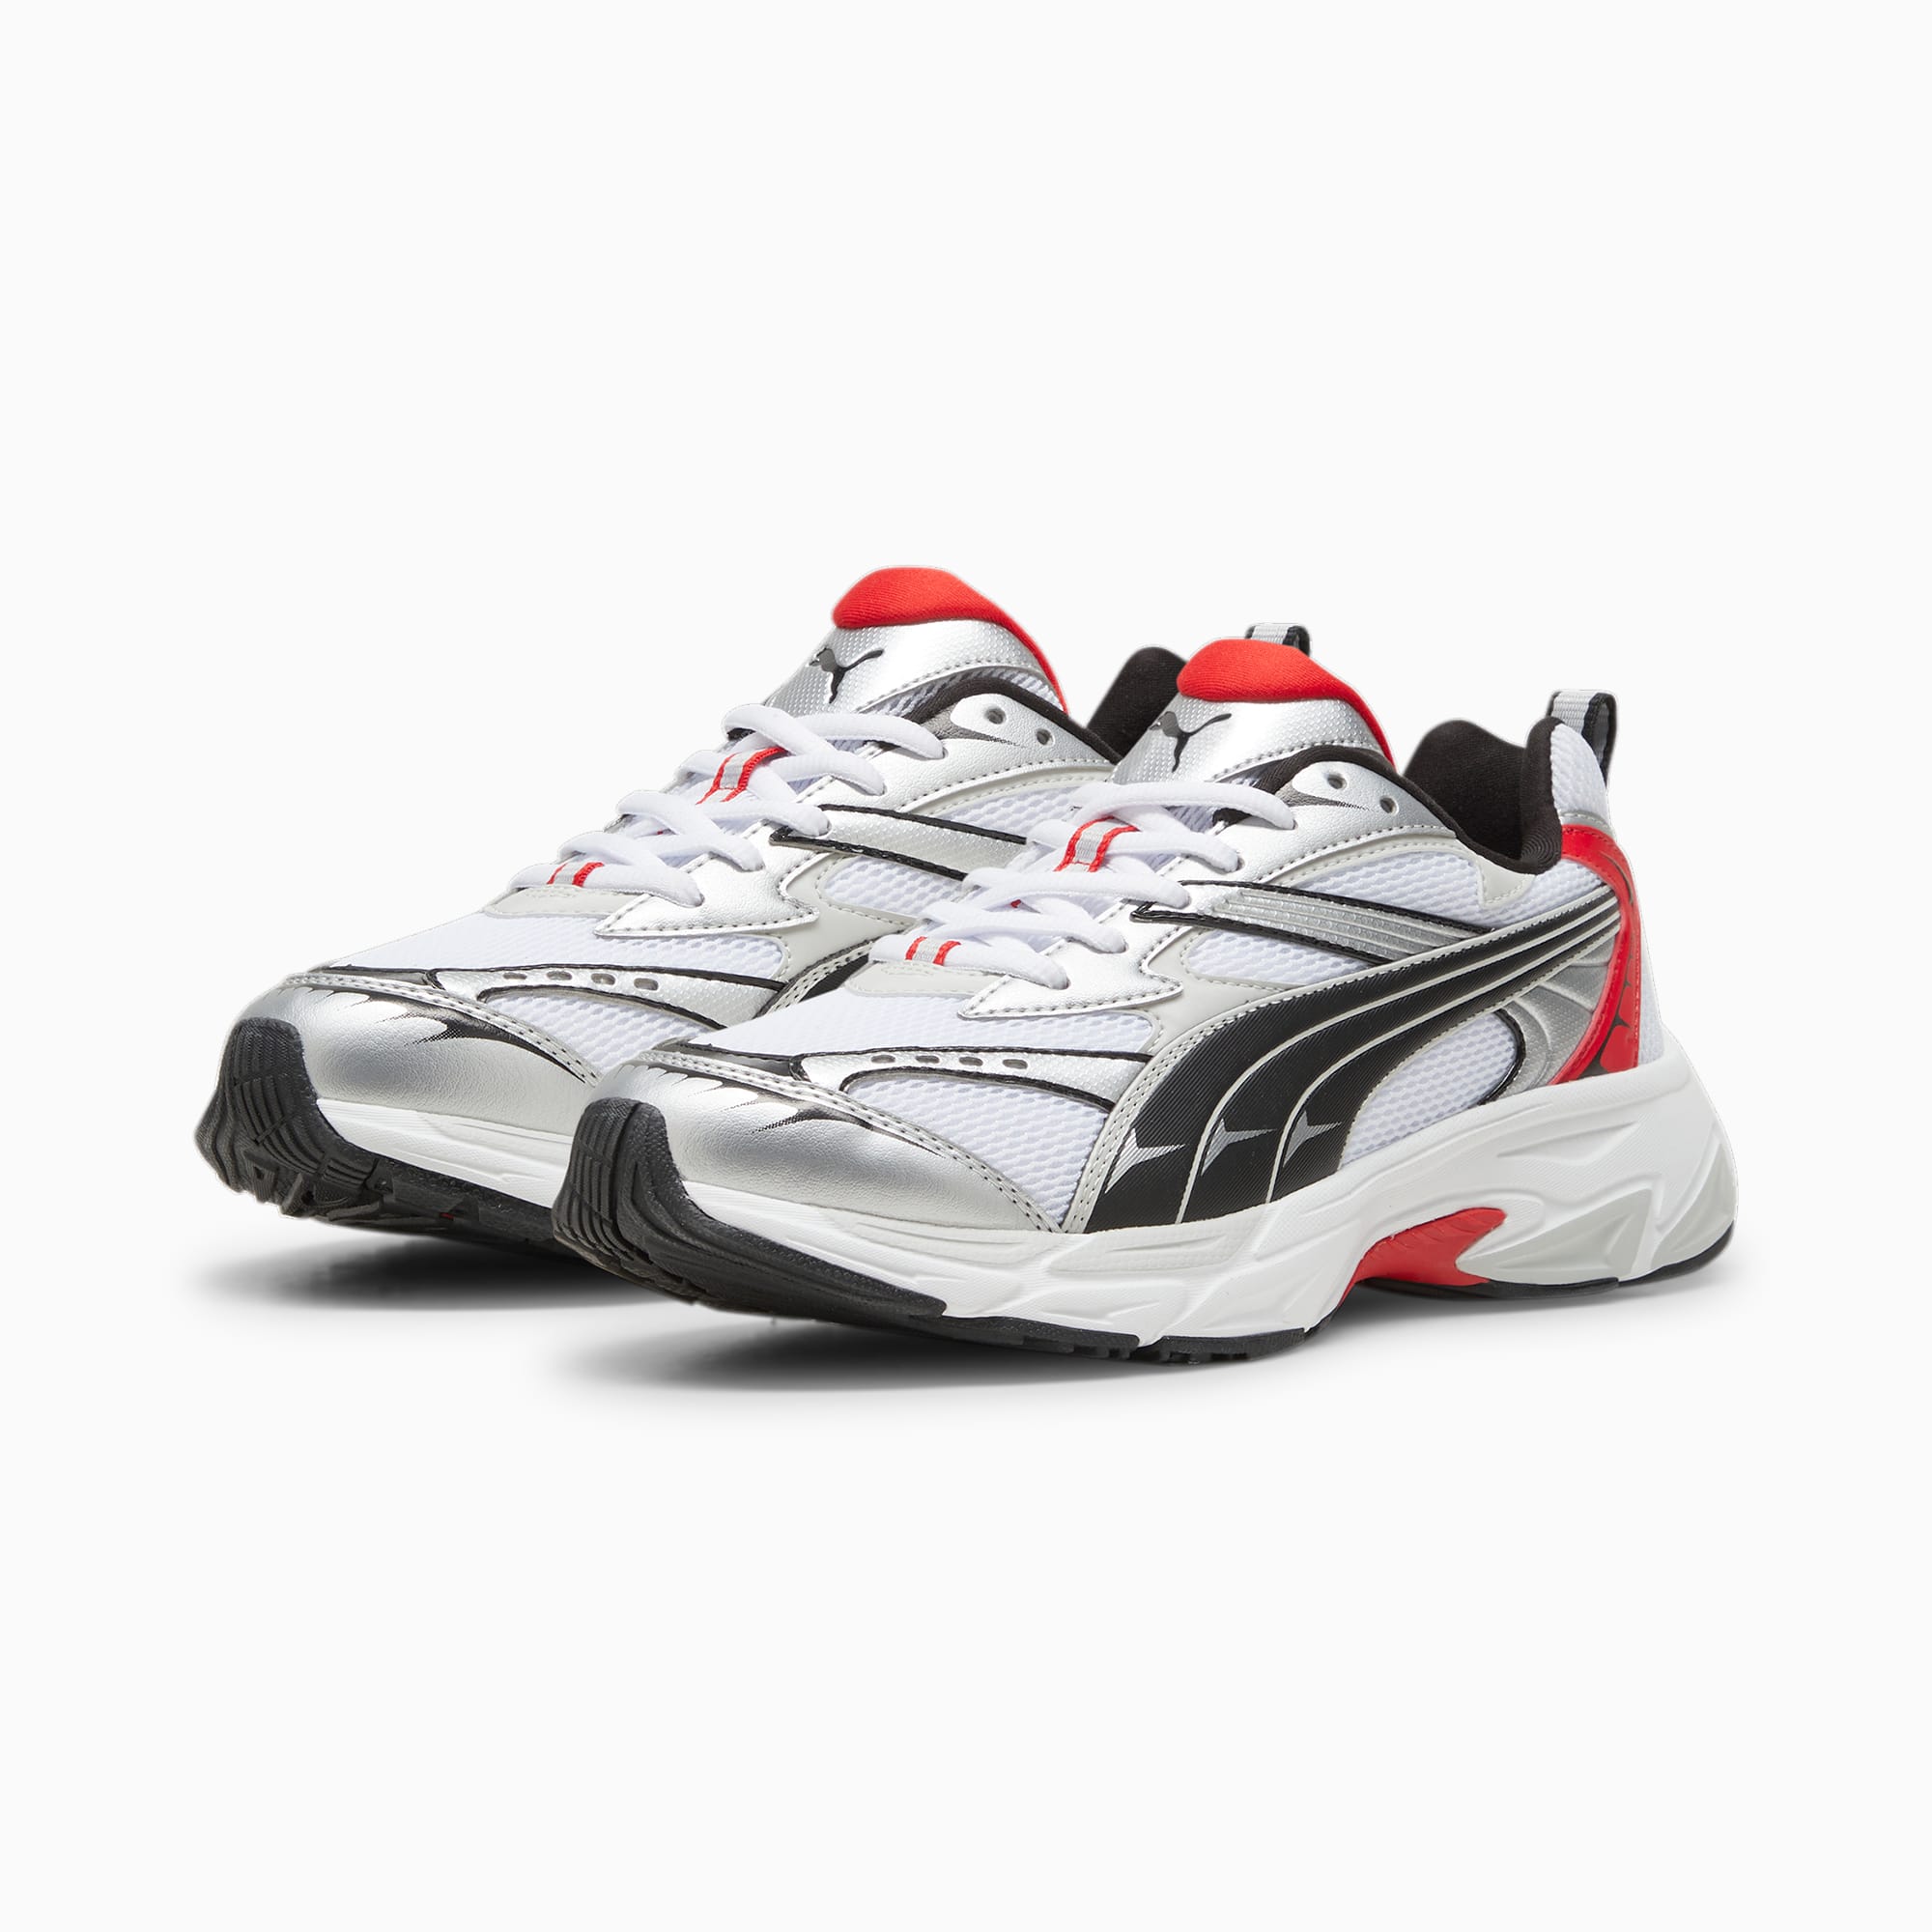 Women's PUMA Morphic Sneakers, White/For All Time Red, Size 35,5, Shoes